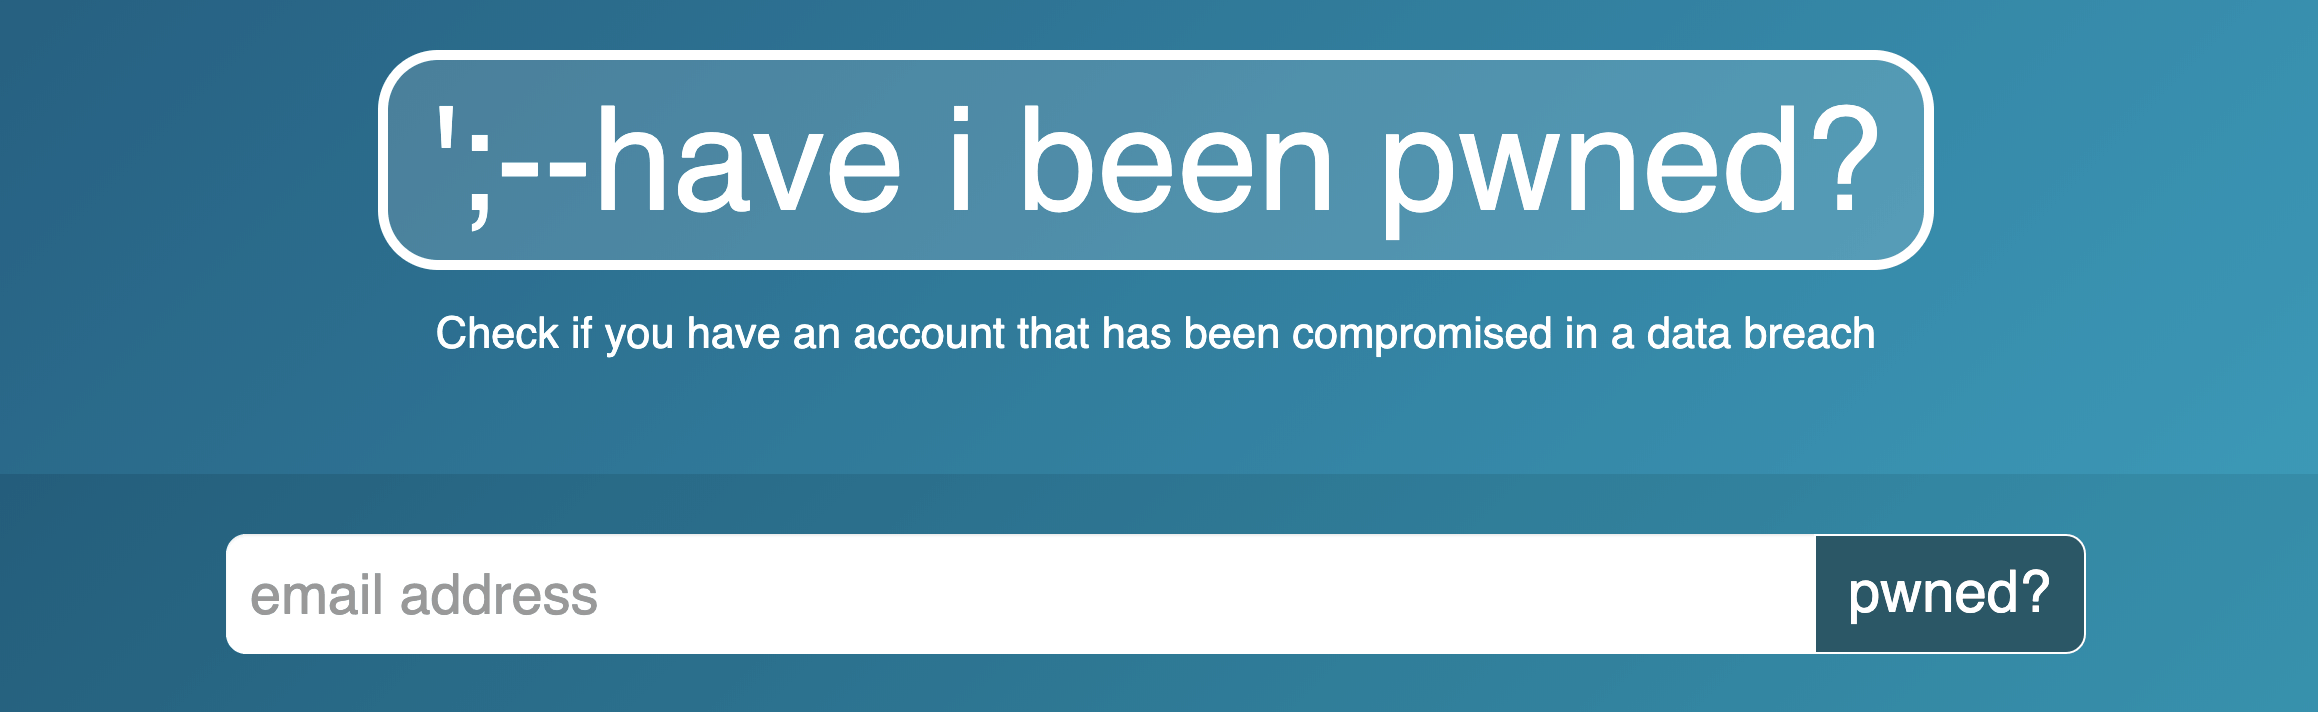 Alt: Check if you have an account that has been compromised in a data breach.